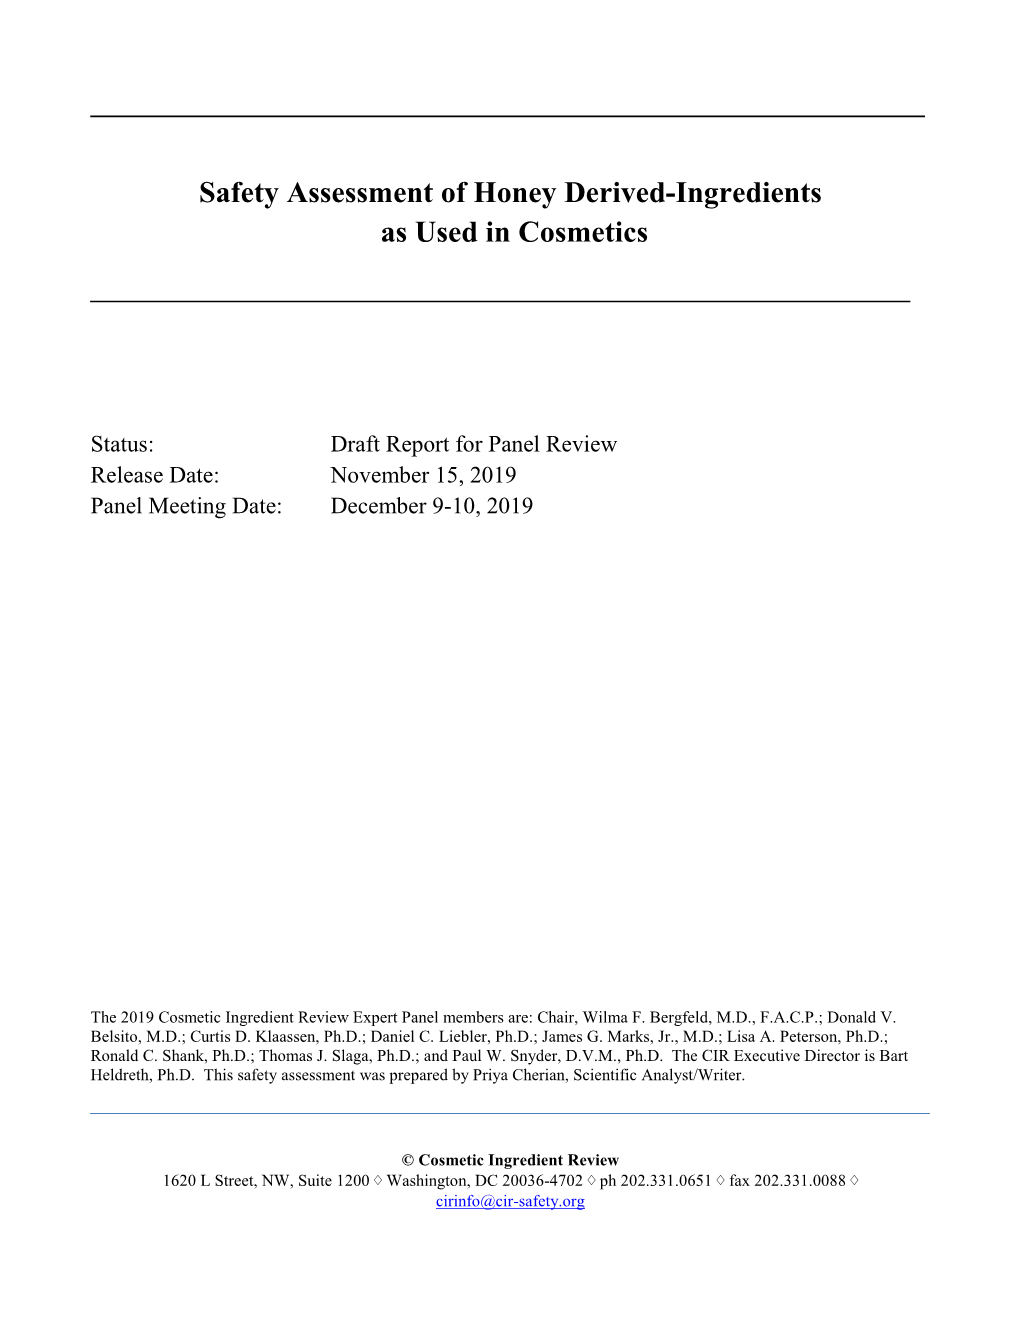 Safety Assessment of Honey Derived-Ingredients As Used in Cosmetics